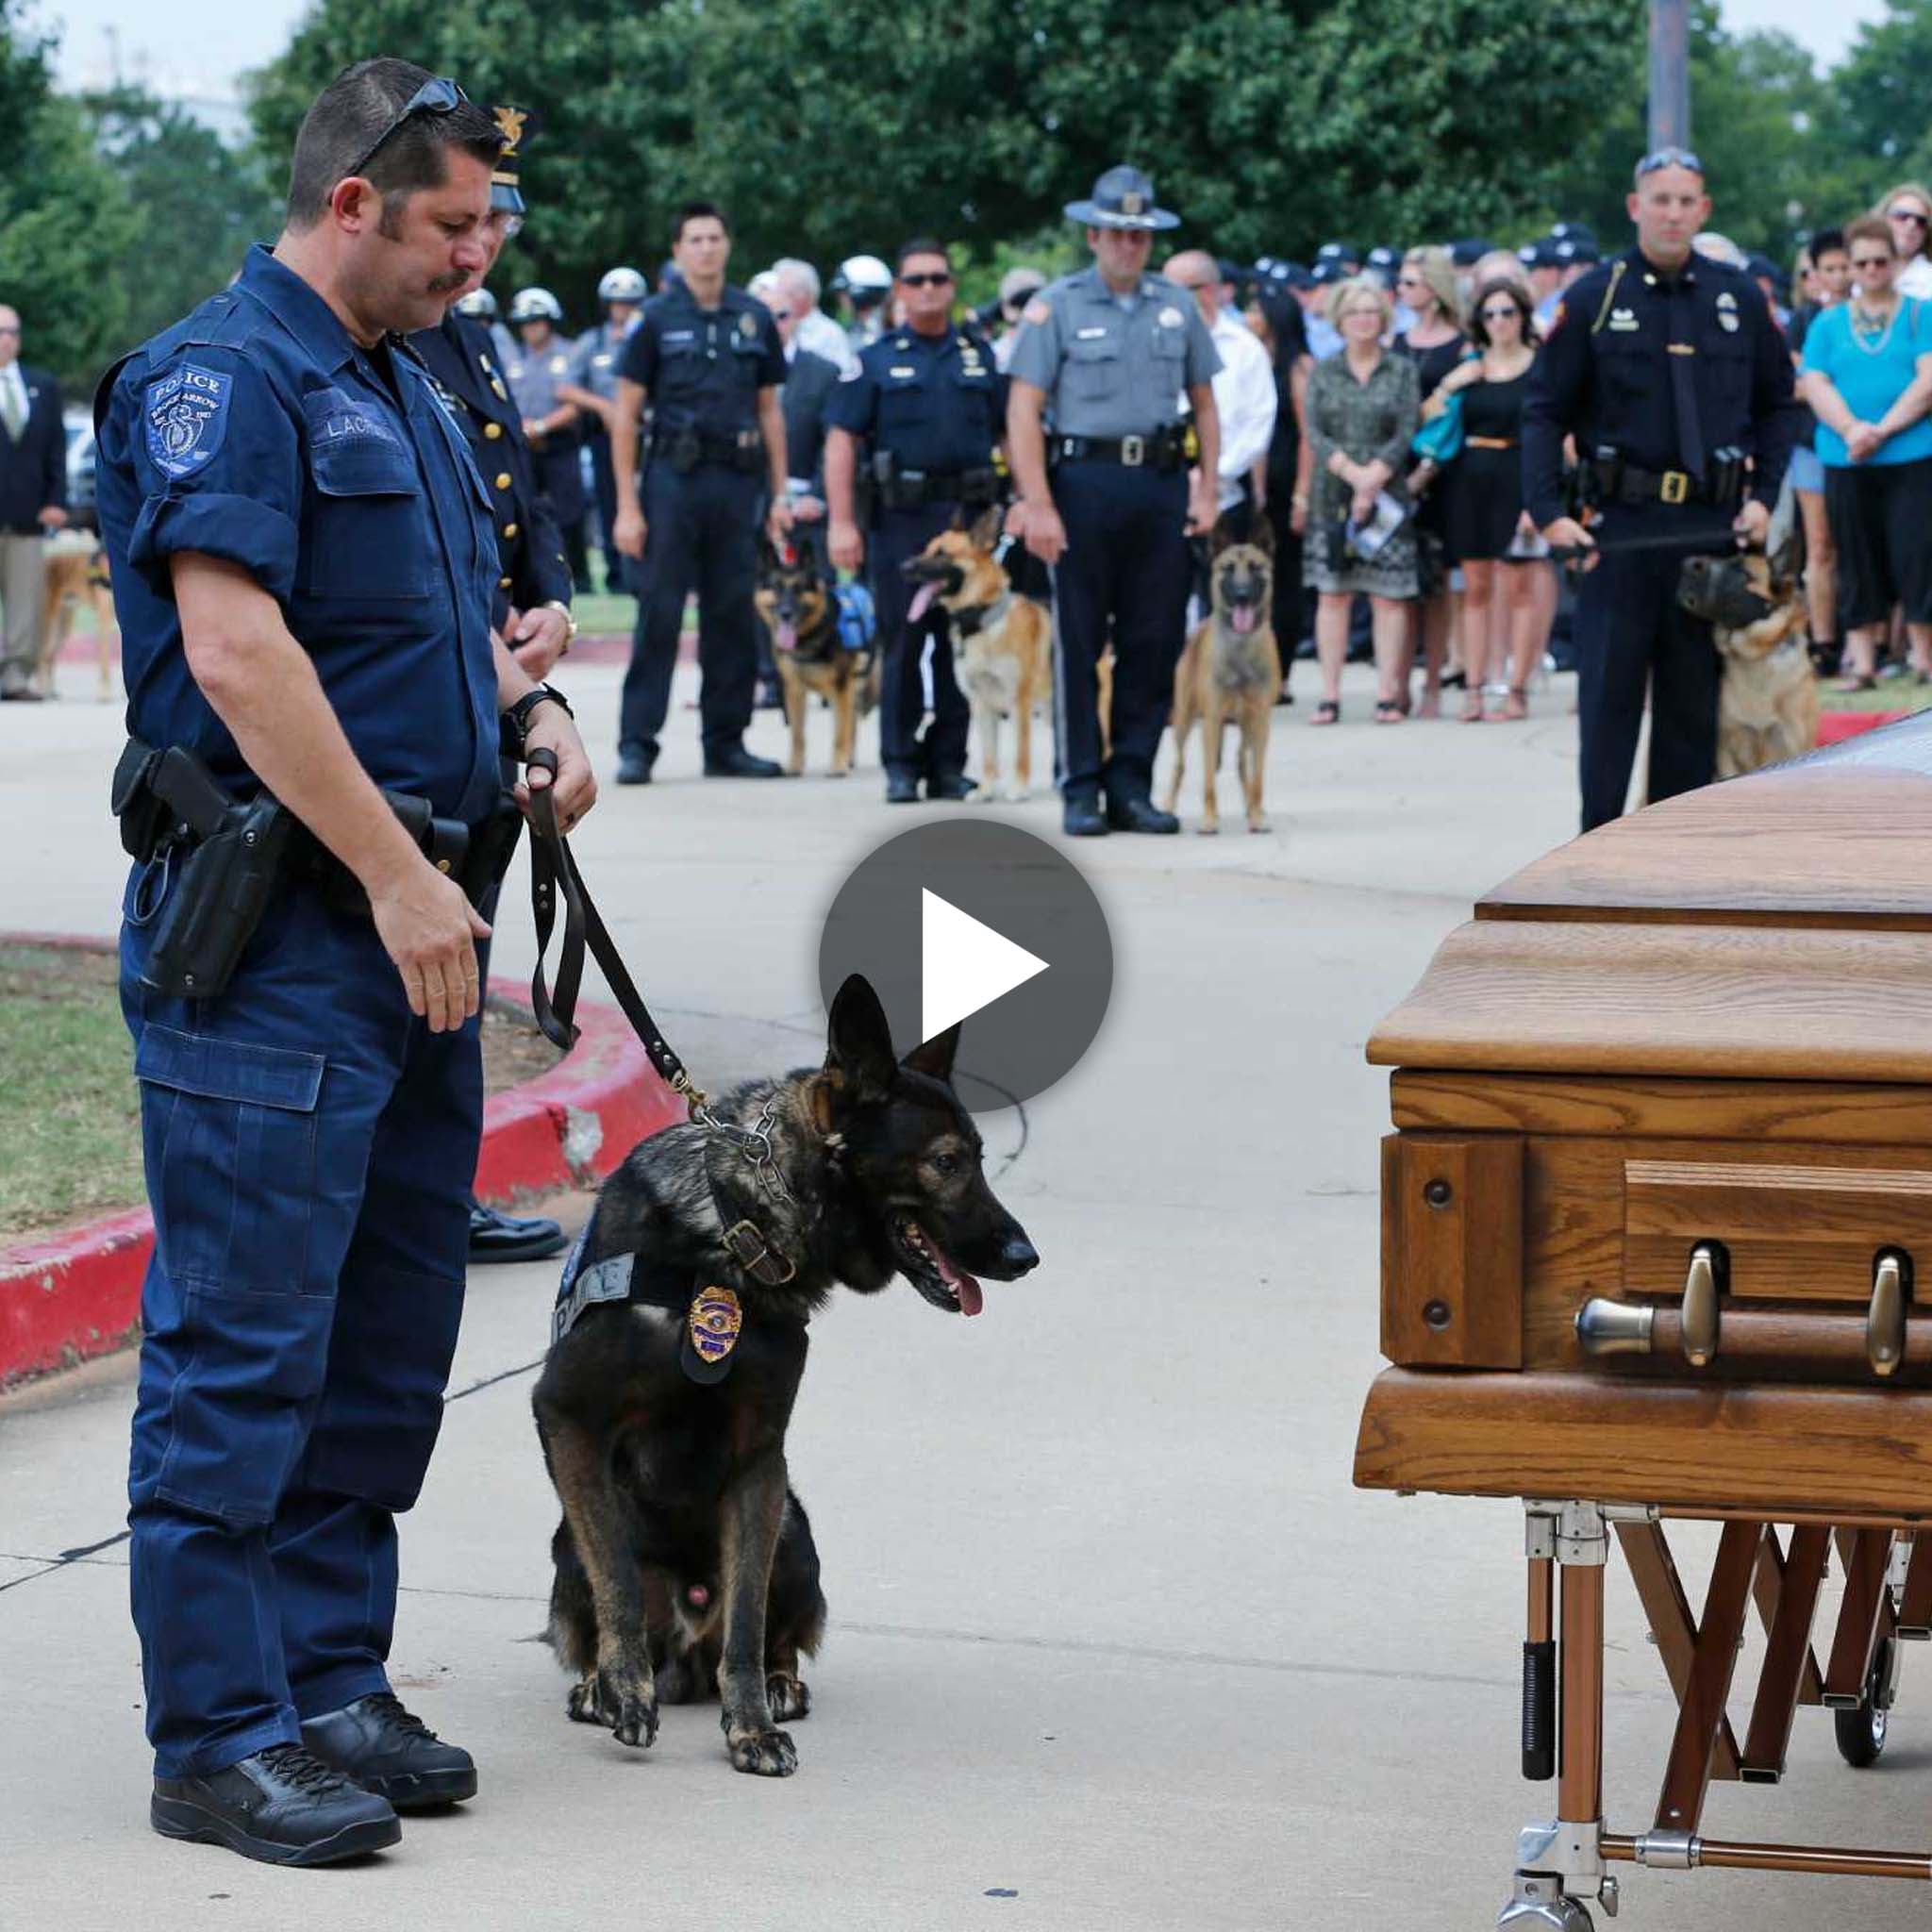 Four-legged hero: The Oklahoma K-9 police dog killed while on duty received a full funeral, bringing tears to many attendees.